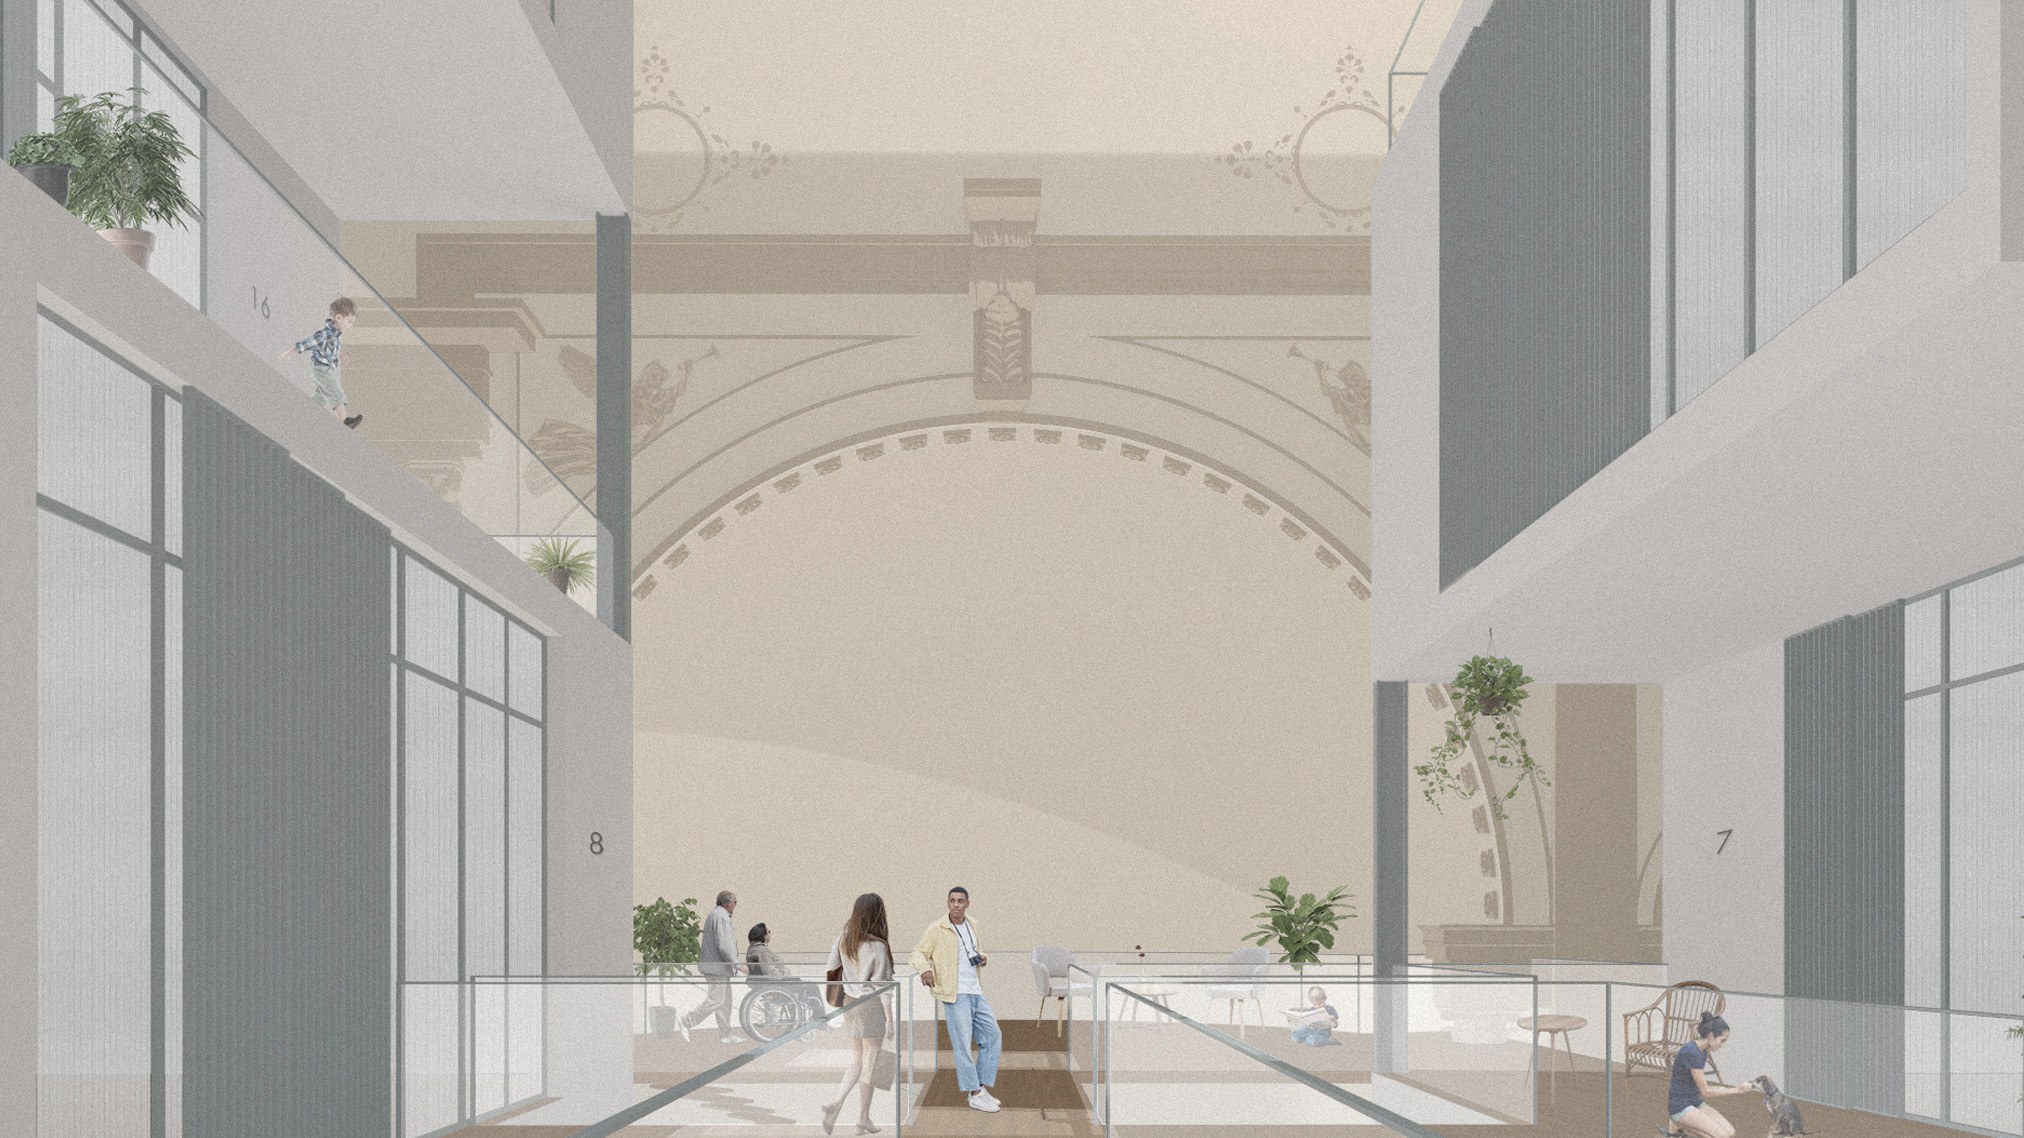 Olivia Georgakopoulos and Alyssa Barber's thesis: interior meeting space rendering